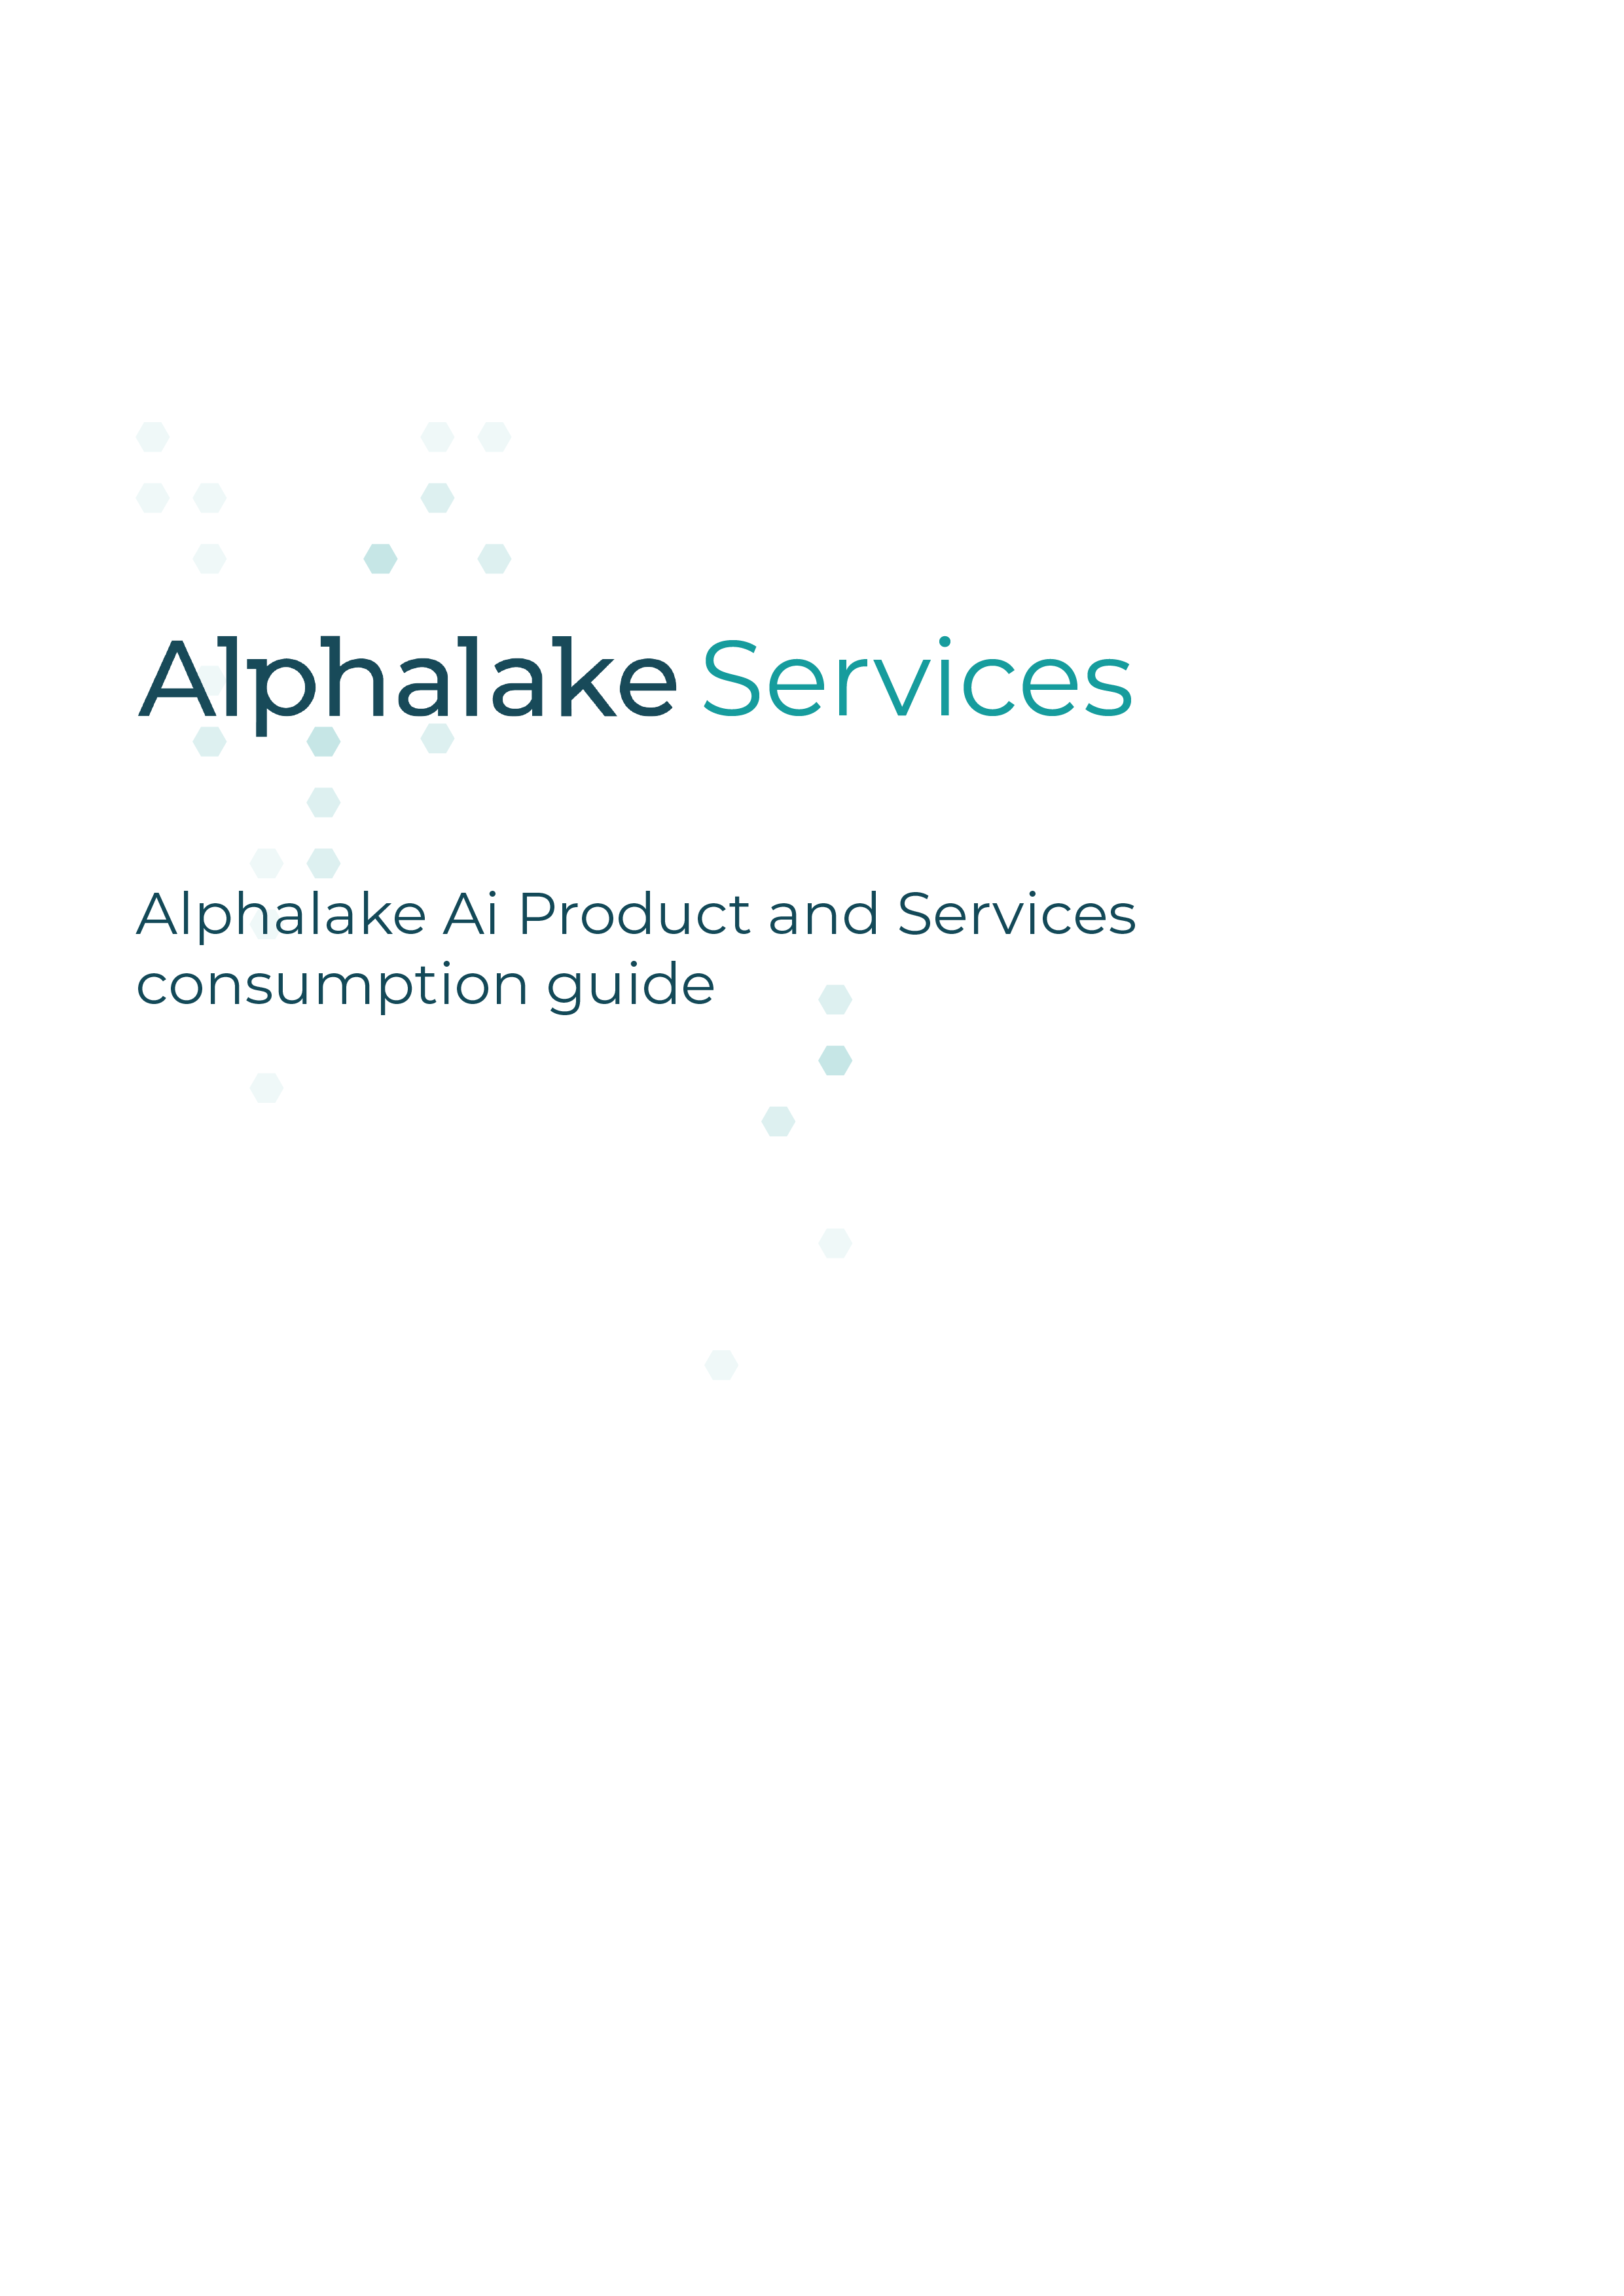 How to consume Alphalake Services